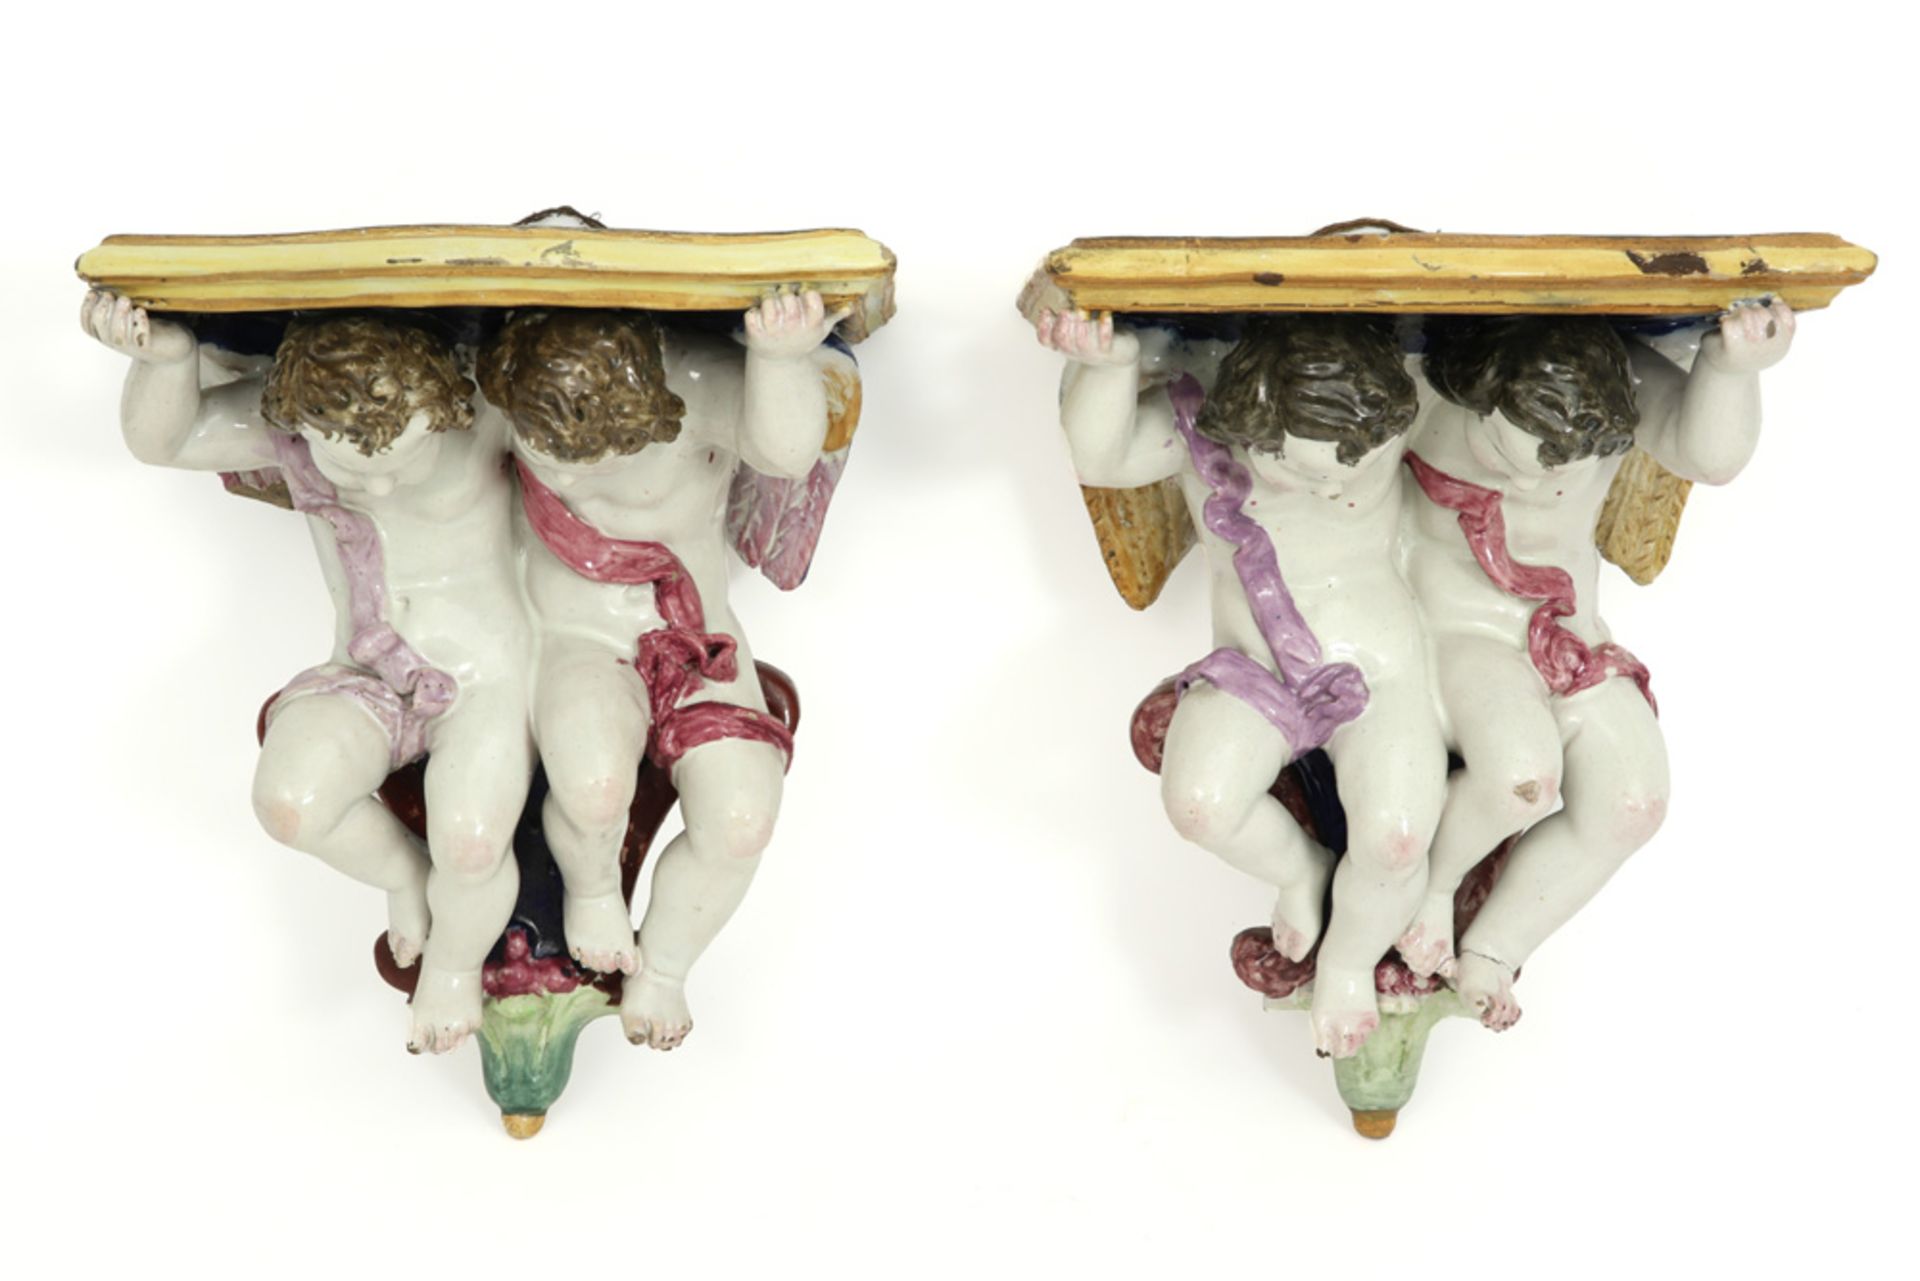 pair of Italian wall hanging consoles, each with two cupids, in polychromed ceramic 